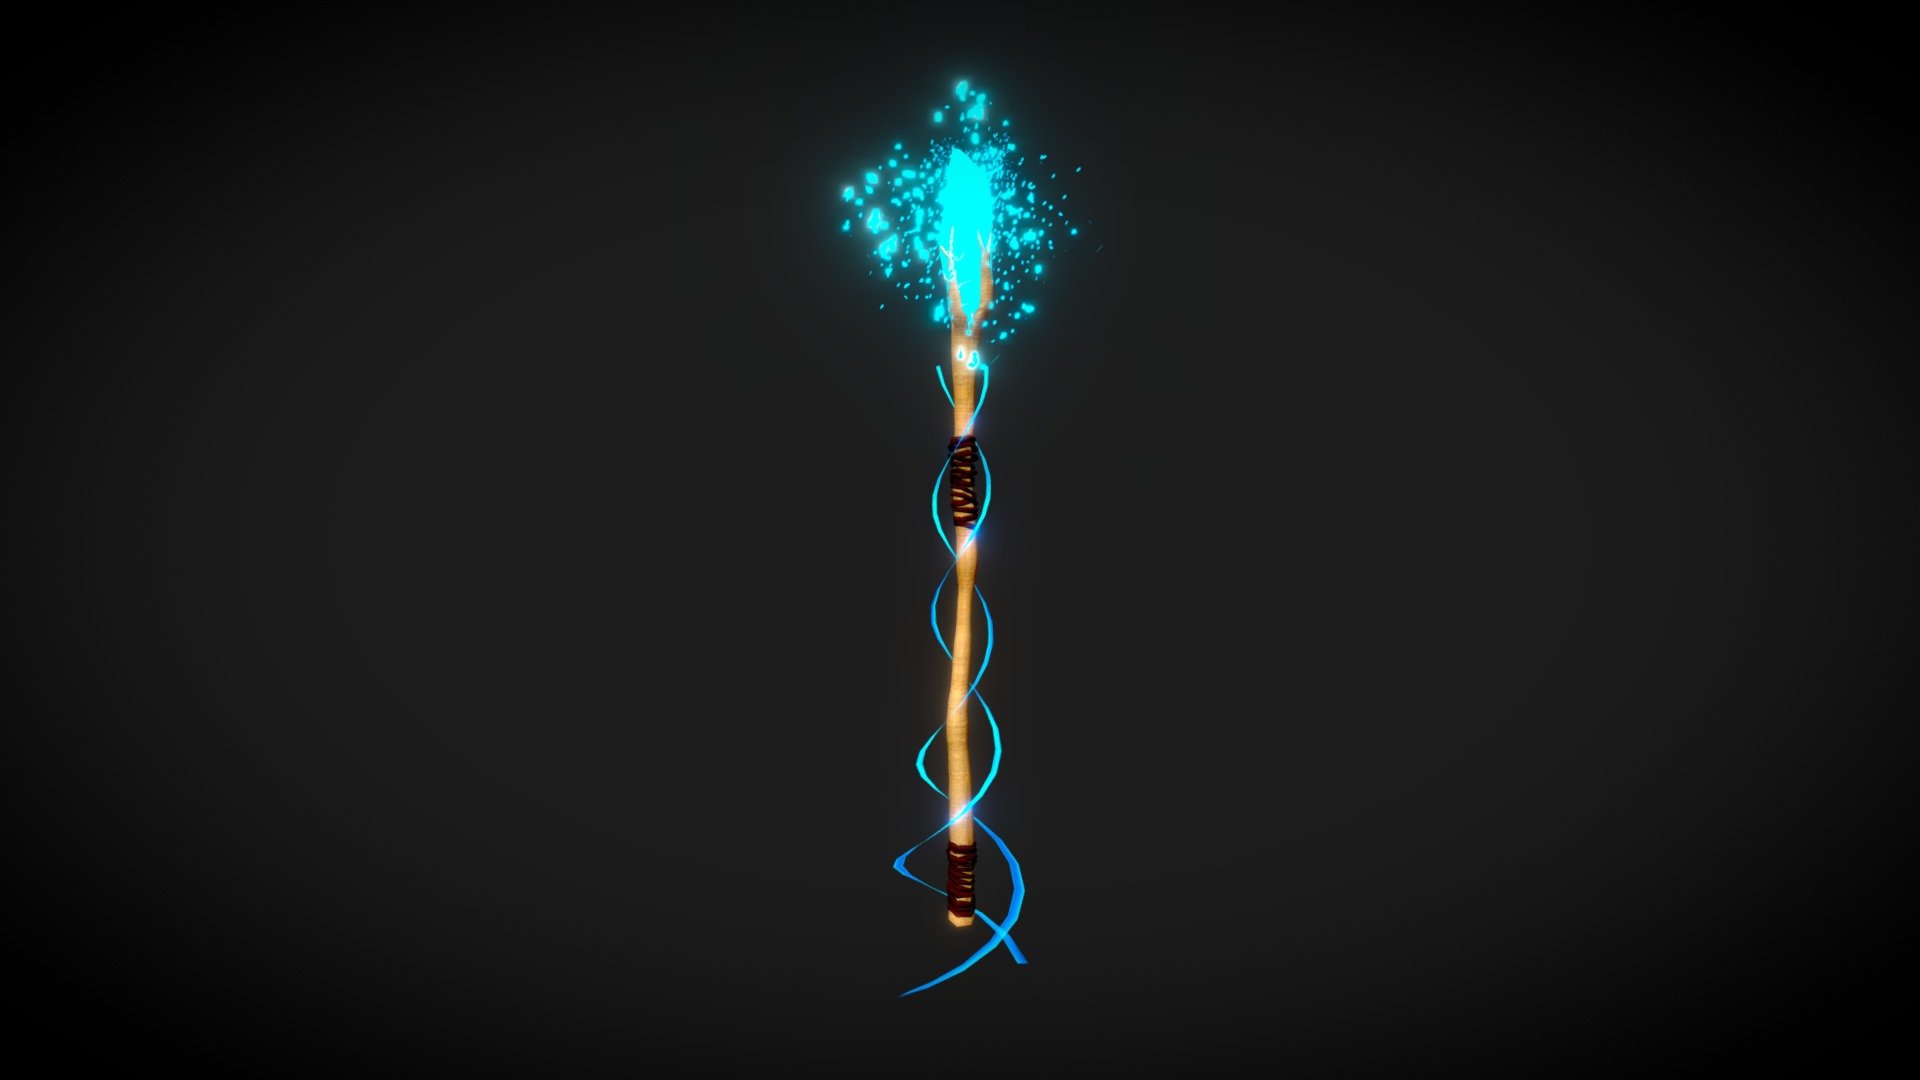 Magic scepter textured with 3D Coat.
I used opacity maps for some effects 3d model